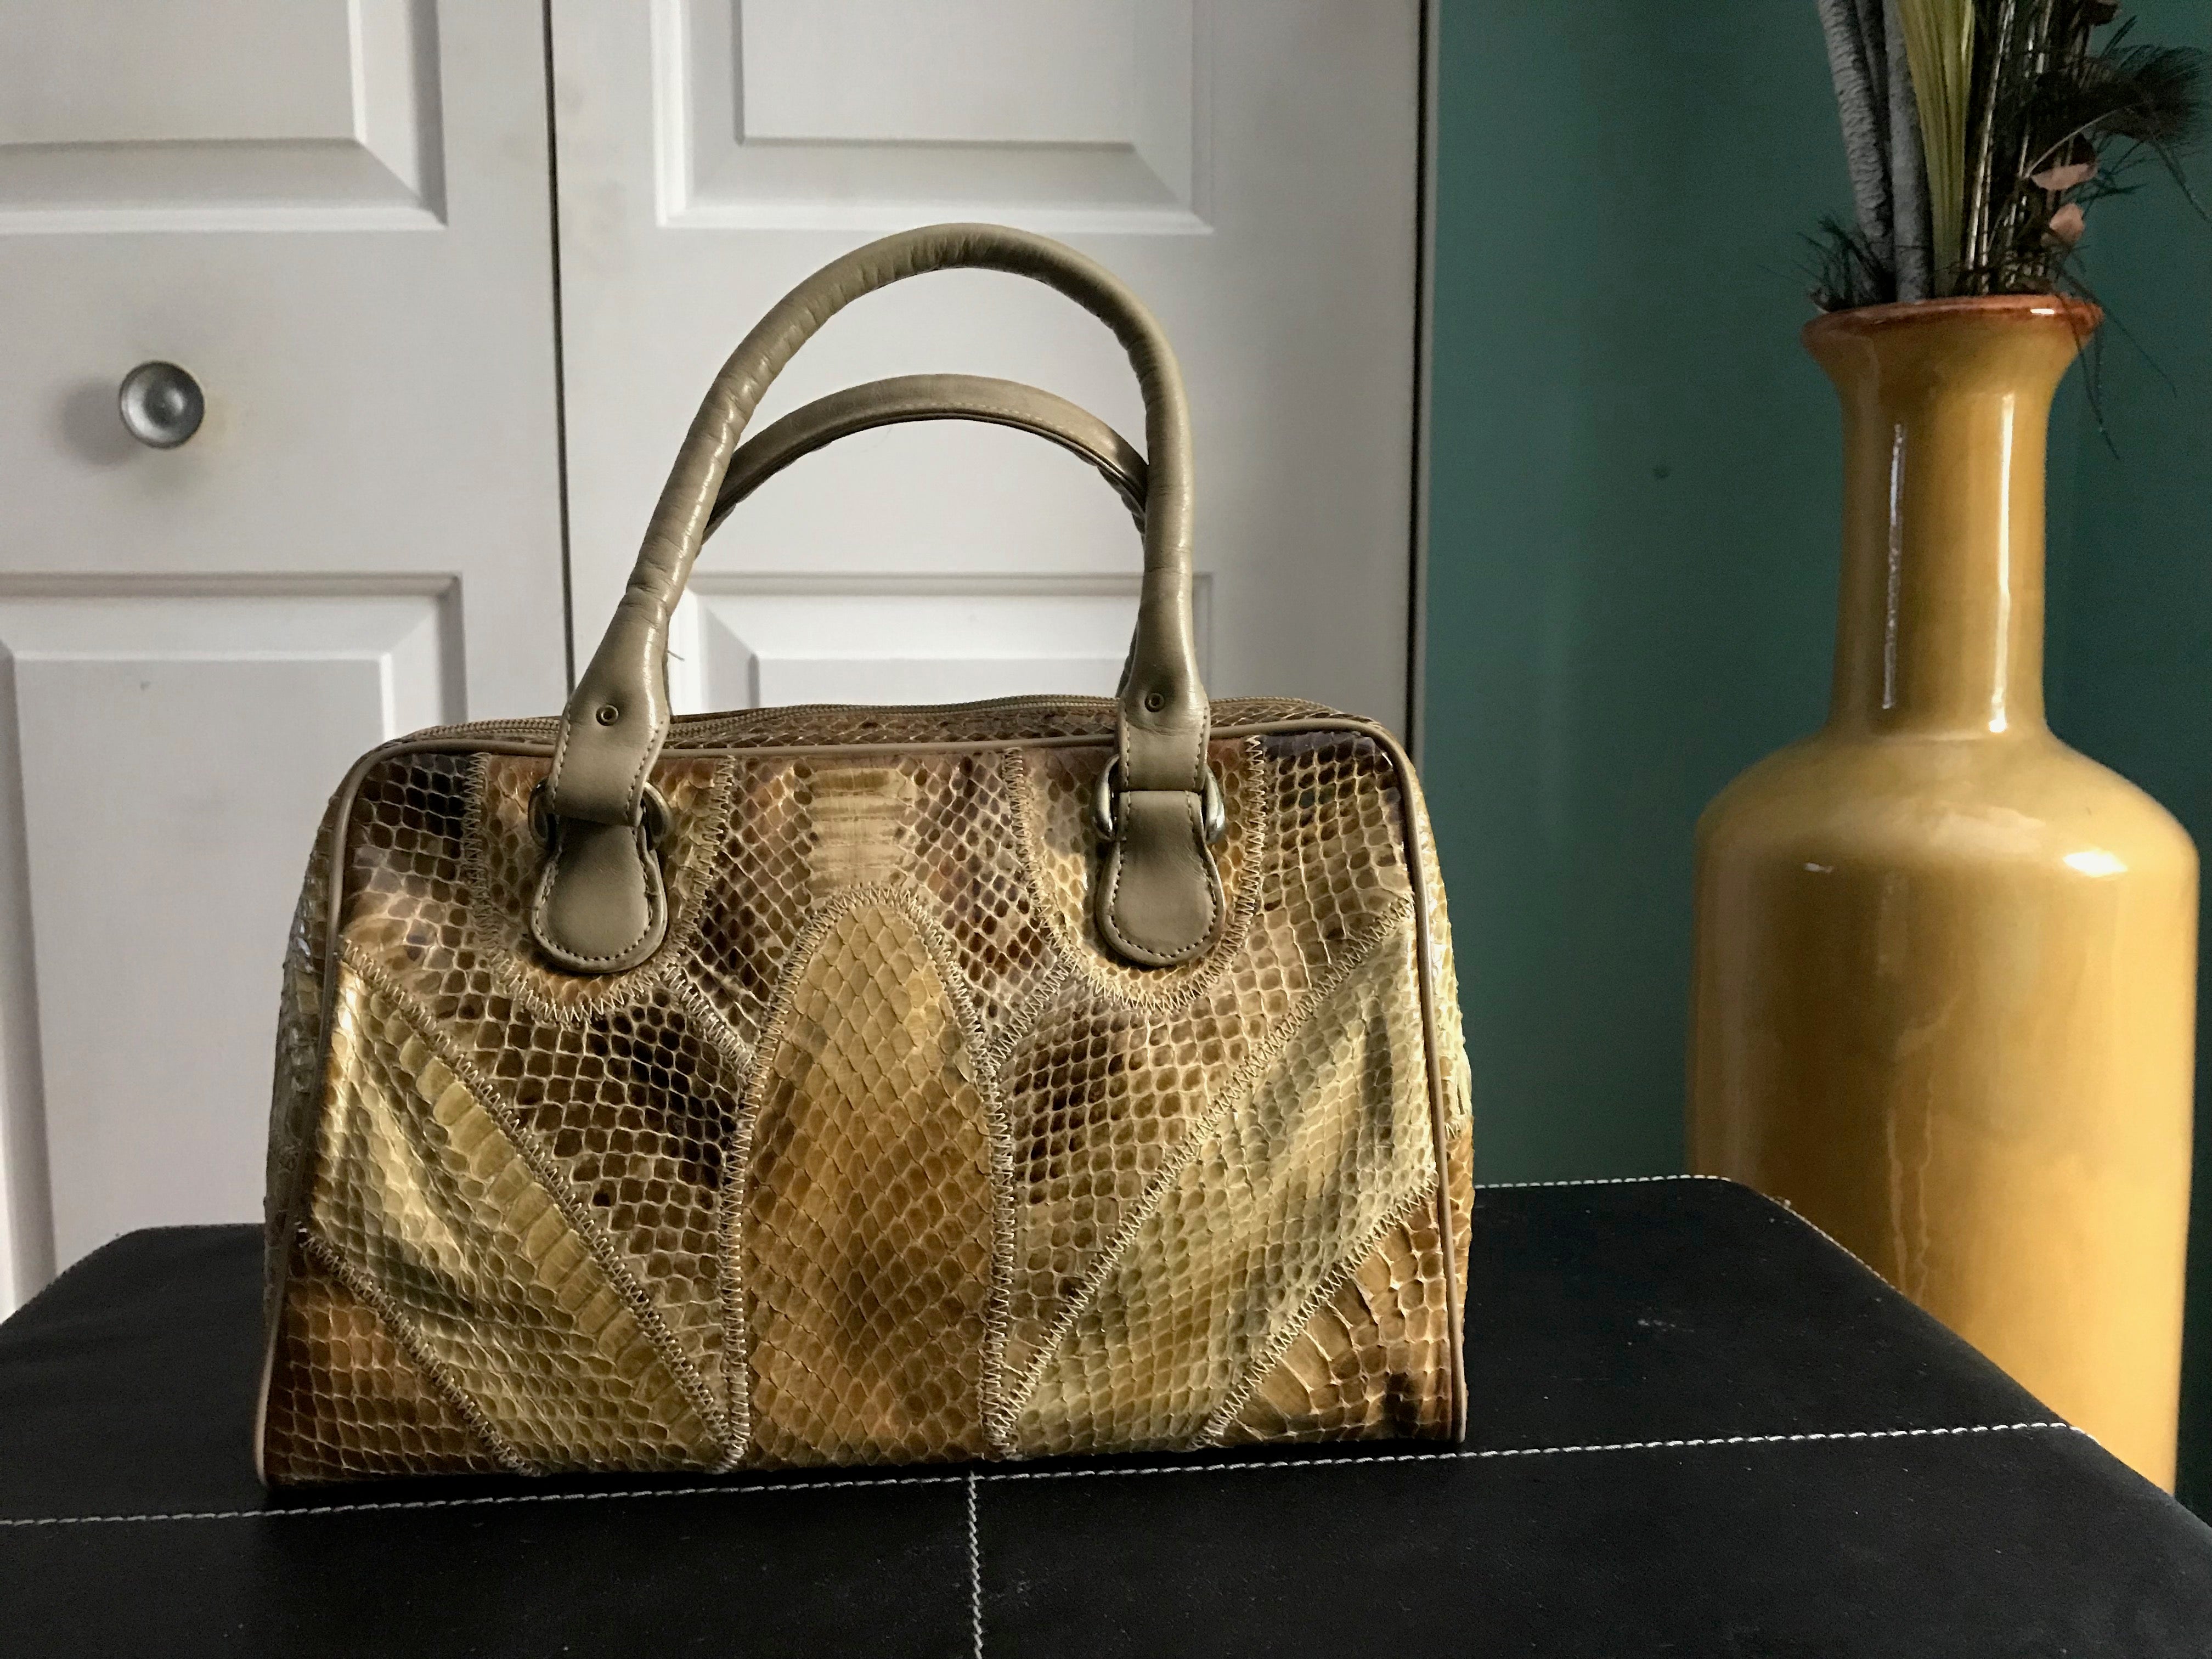 Snakeskin Purse Golden Brown Tans Patchwork Reptile